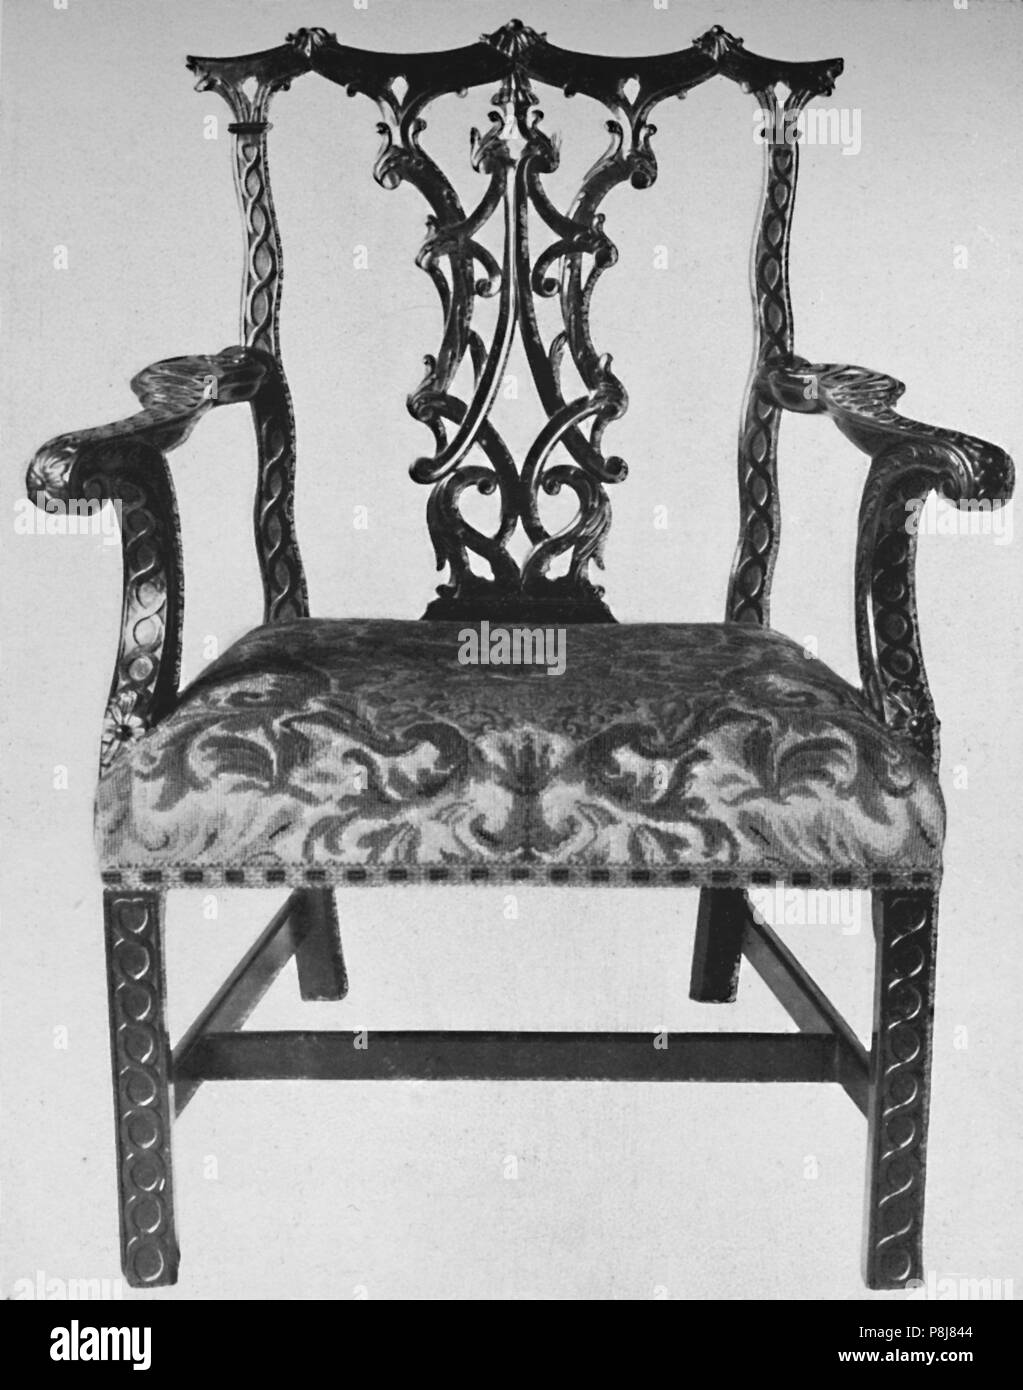 'Chinese Chippendale Elbow-Chair  with Seat in Contemporary Needlework', mid 18th century, (1928). Artist: Thomas Chippendale. Stock Photo